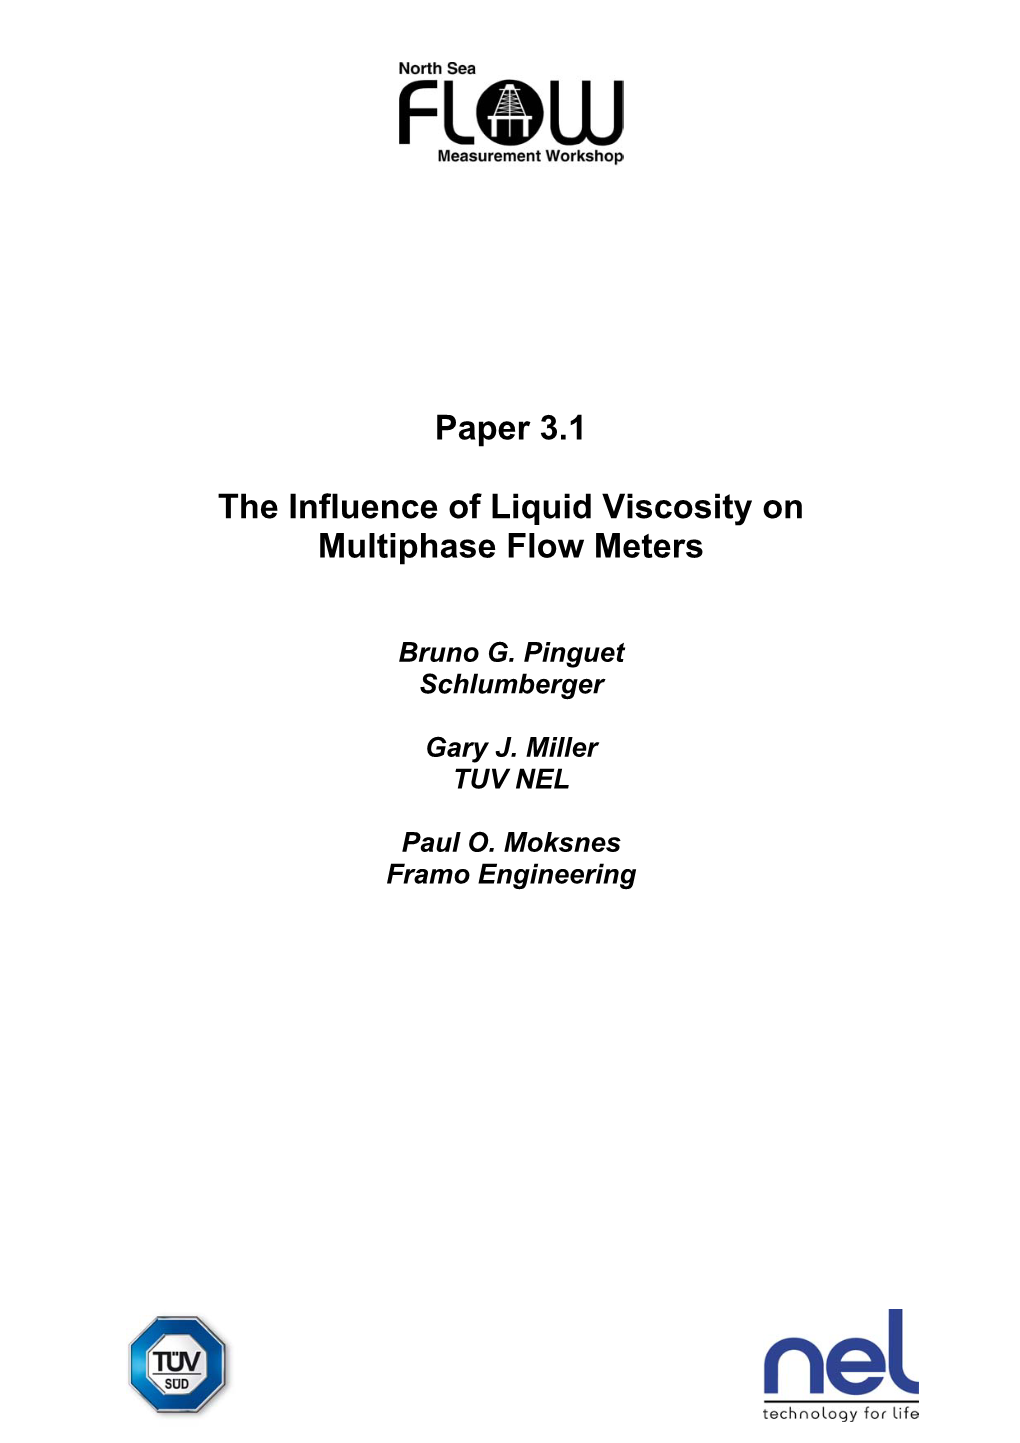 Paper 3.1 the Influence of Liquid Viscosity on Multiphase Flow Meters